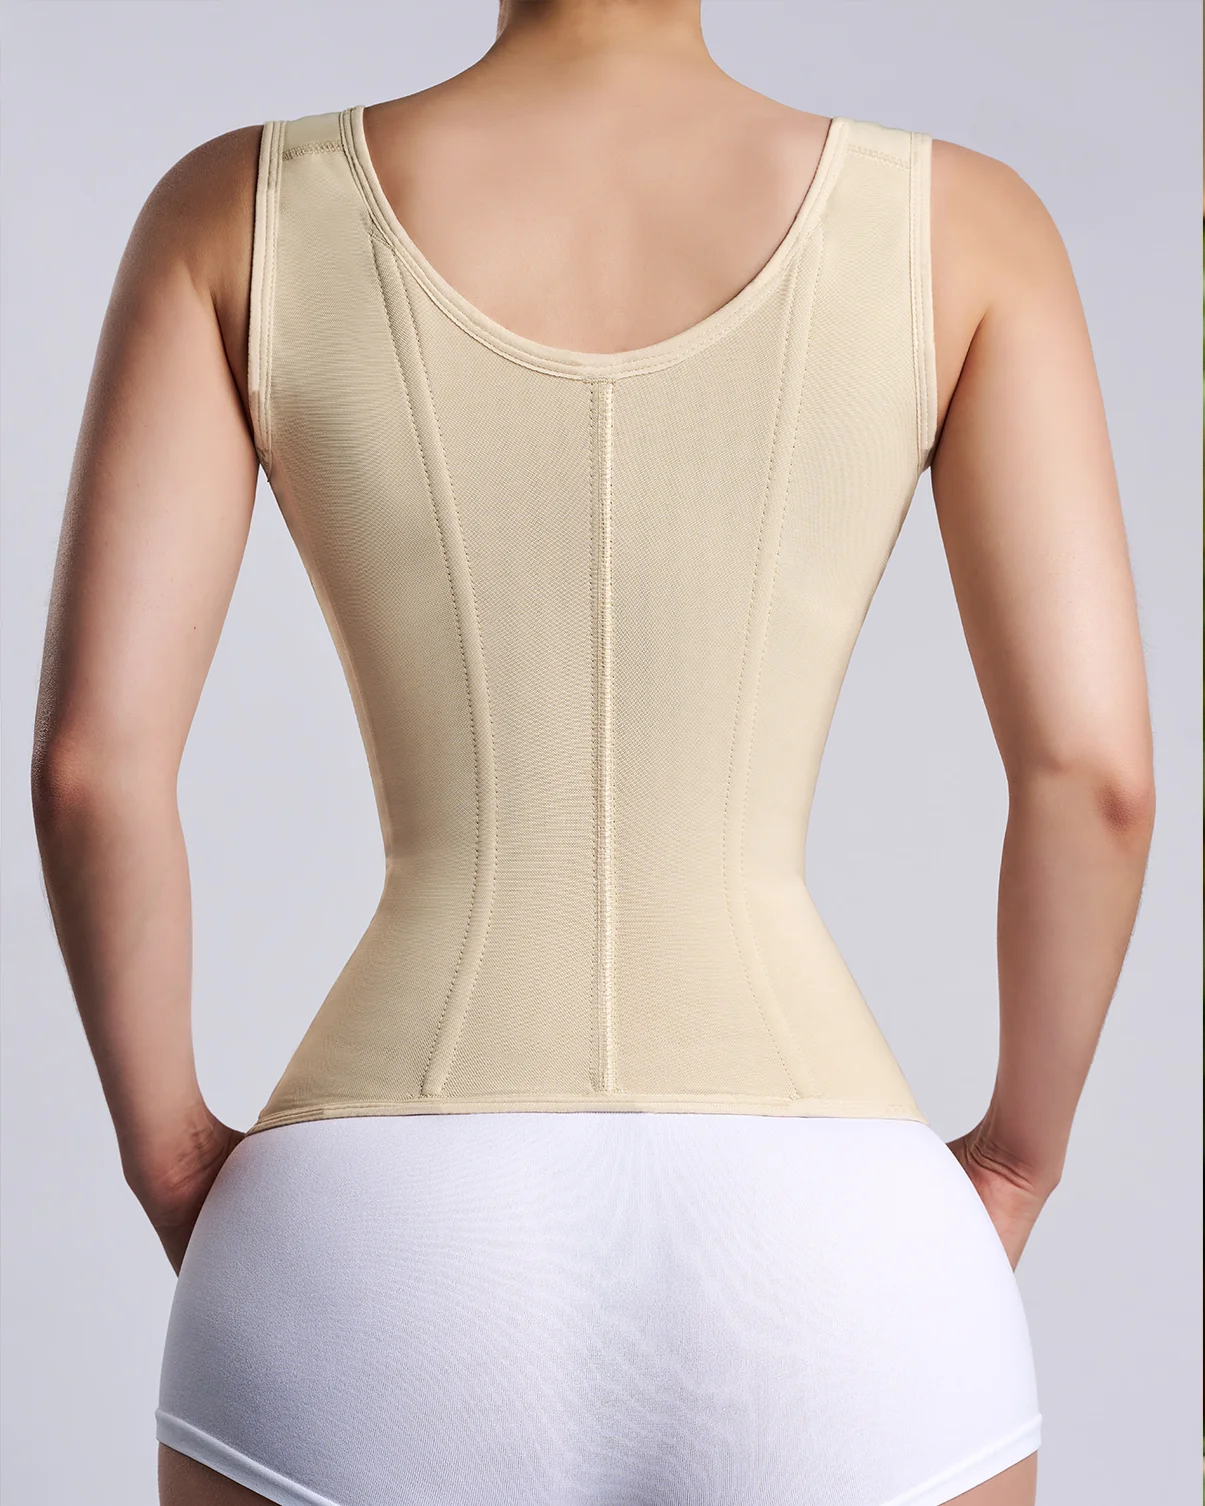 

Women Waist Trainer Corset Hourglass Vest Reducing And Shaping Girdles For Women Sexy​ ​Lingerie Women Body